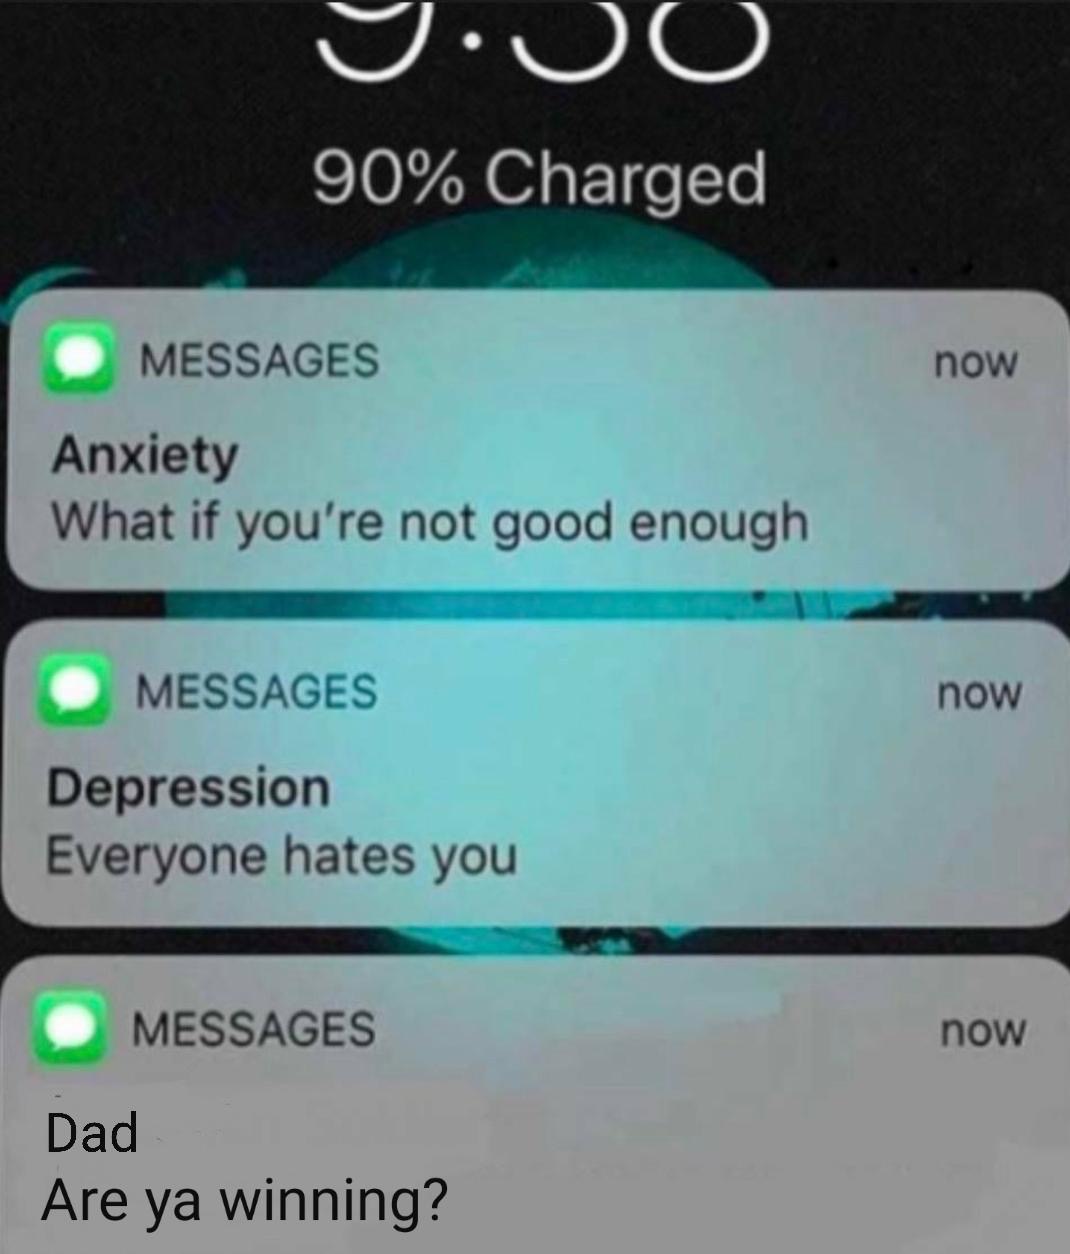 hugeplateofketchup8 - 90% Charged Messages now Anxiety What if you're not good enough Messages now Depression Everyone hates you Messages now Dad Are ya winning?